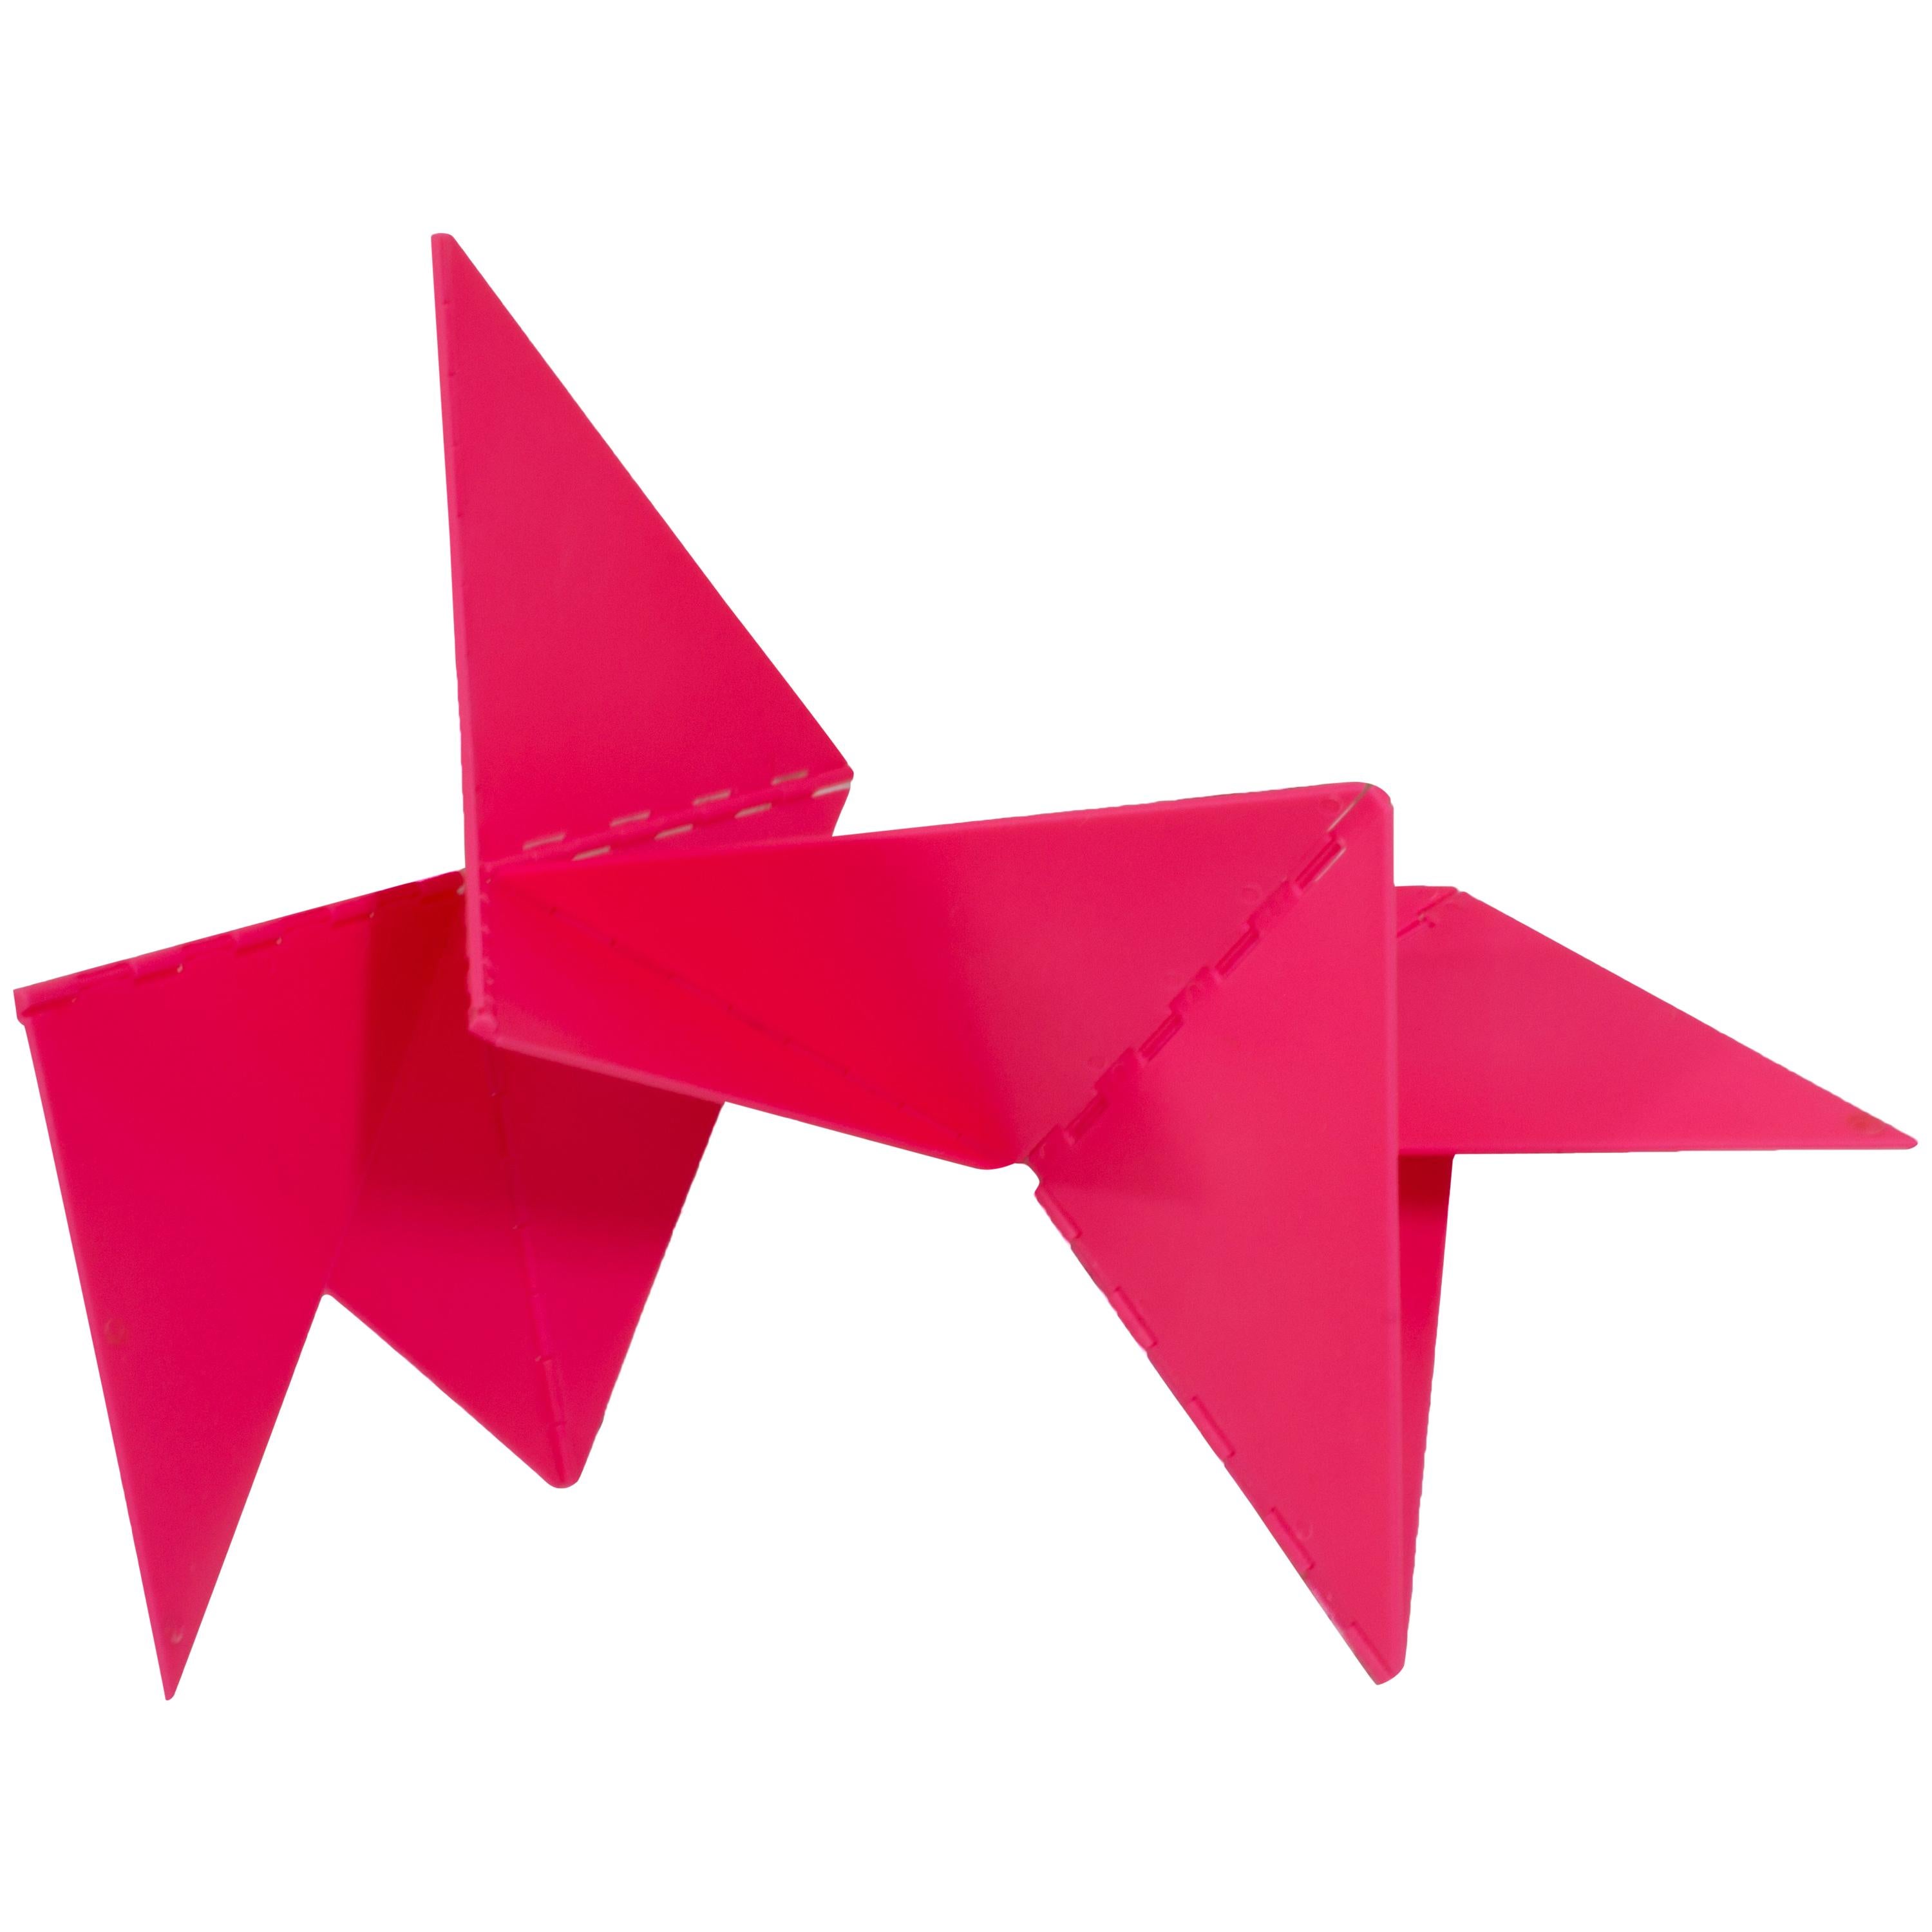 Lygia Clark Linear Critter Red Plastic Reproduction For Sale